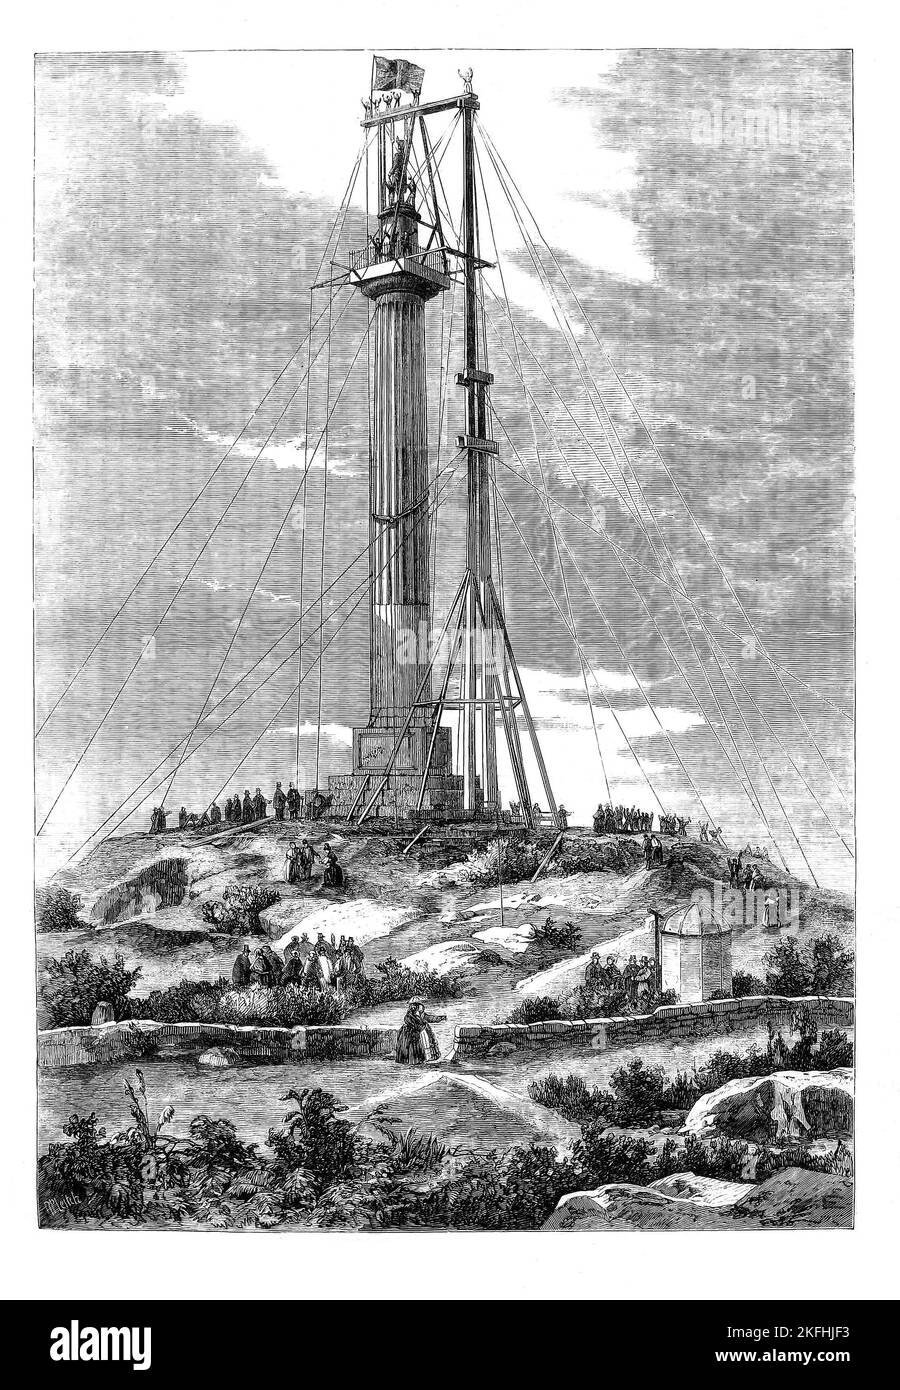 A mid-19th century drawing of the erection of the Marquess of Anglesey's Column, aka Anglesey Column or Tŵr Marcwis in Welsh. The  27-metre-high (89 ft) Doric column near the Menai Strait in Wales, is dedicated to Henry William Paget (the first Marquess of Anglesey) to commemorate his valour in the Napoleonic Wars and was designed by Thomas Harrison to stand close to Paget's country retreat at Plas Newydd. It was completed in 1860 (after the Marquess had died) when the brass sculpture at the top was added. Stock Photo